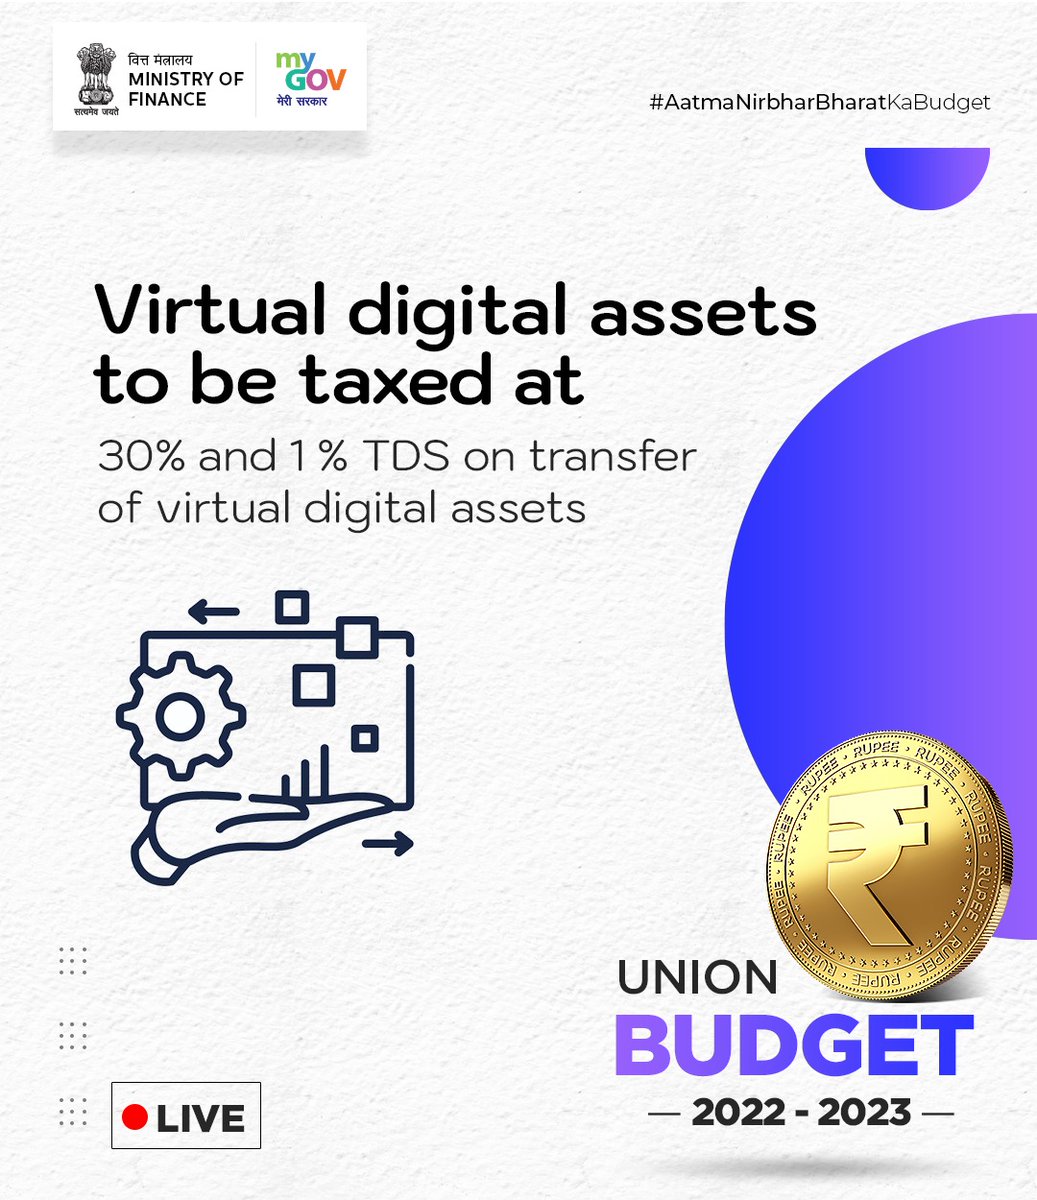 Income from the transfer of any #VirtualDigitalAssets will be taxed at 30% further widening our tax bracket & creating avenues for revenue generation.
 
This applies to cryptocurrencies & any other digital assets.
 
#AatmaNirbharBharatKaBudget
 
19/n